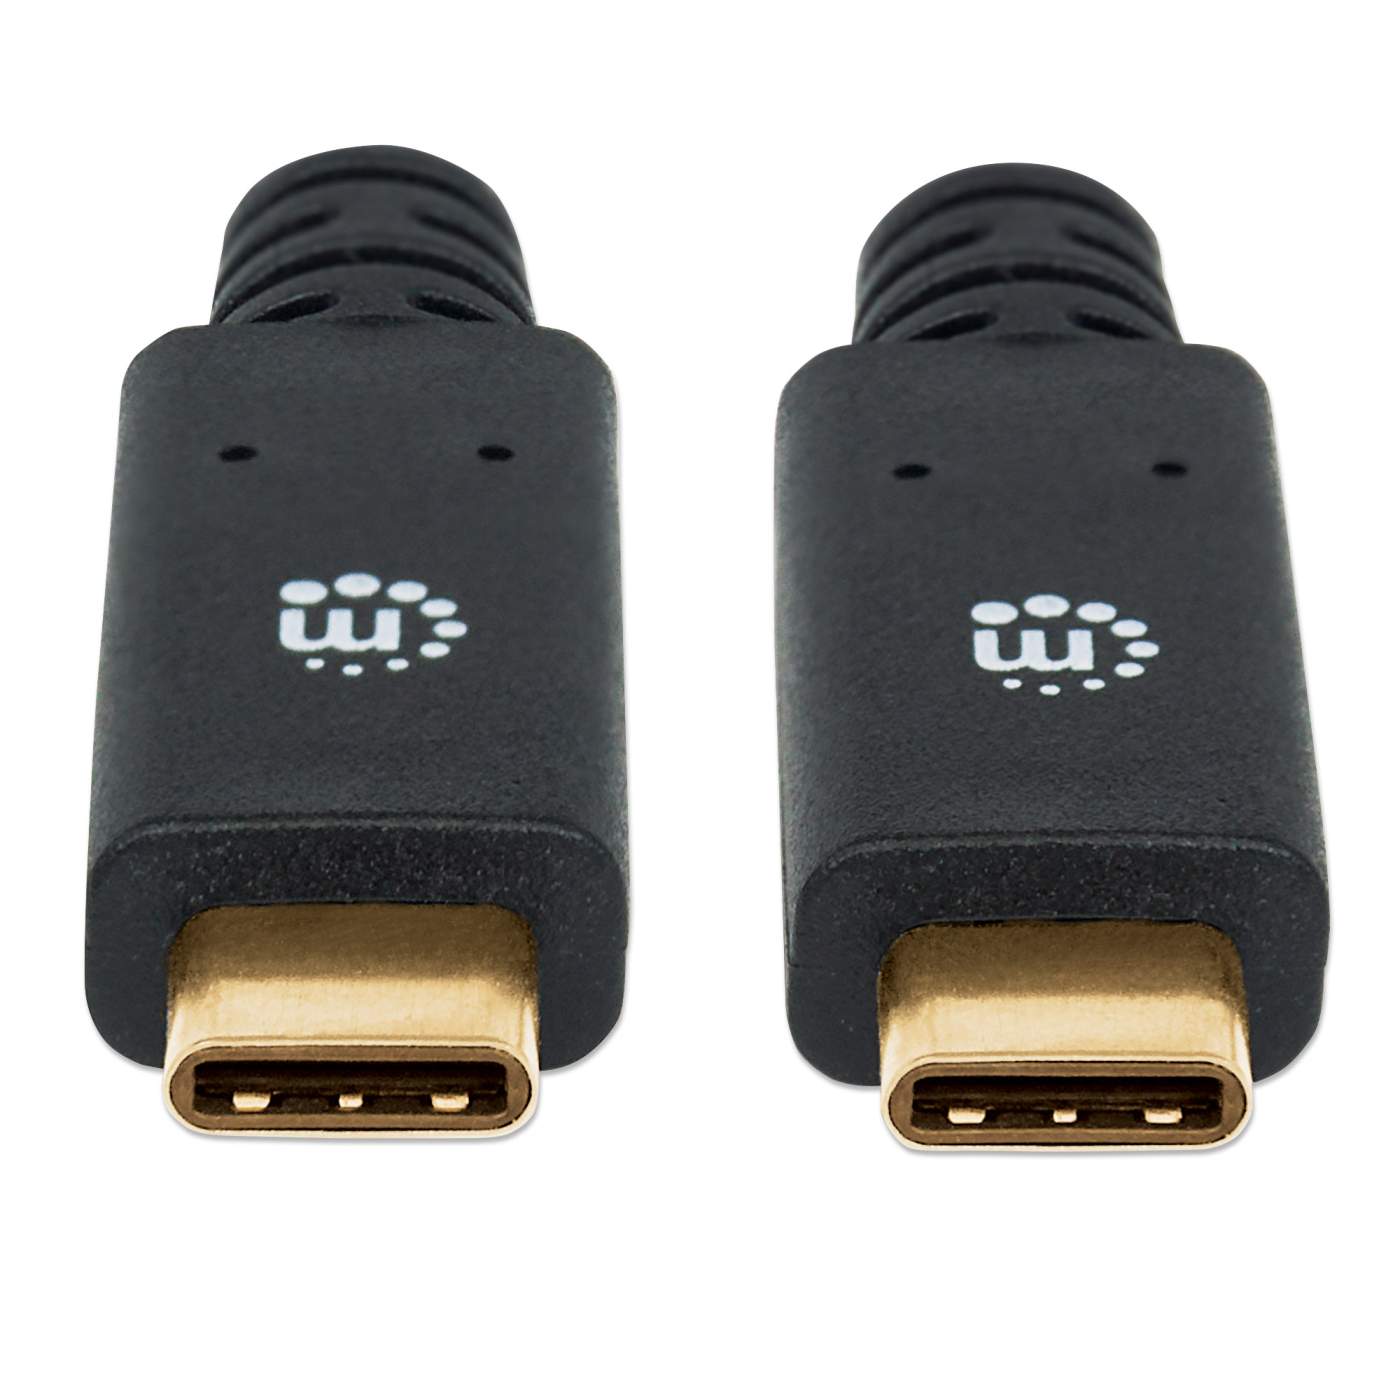 USB 3.0 Type-C Device Cable Image 4